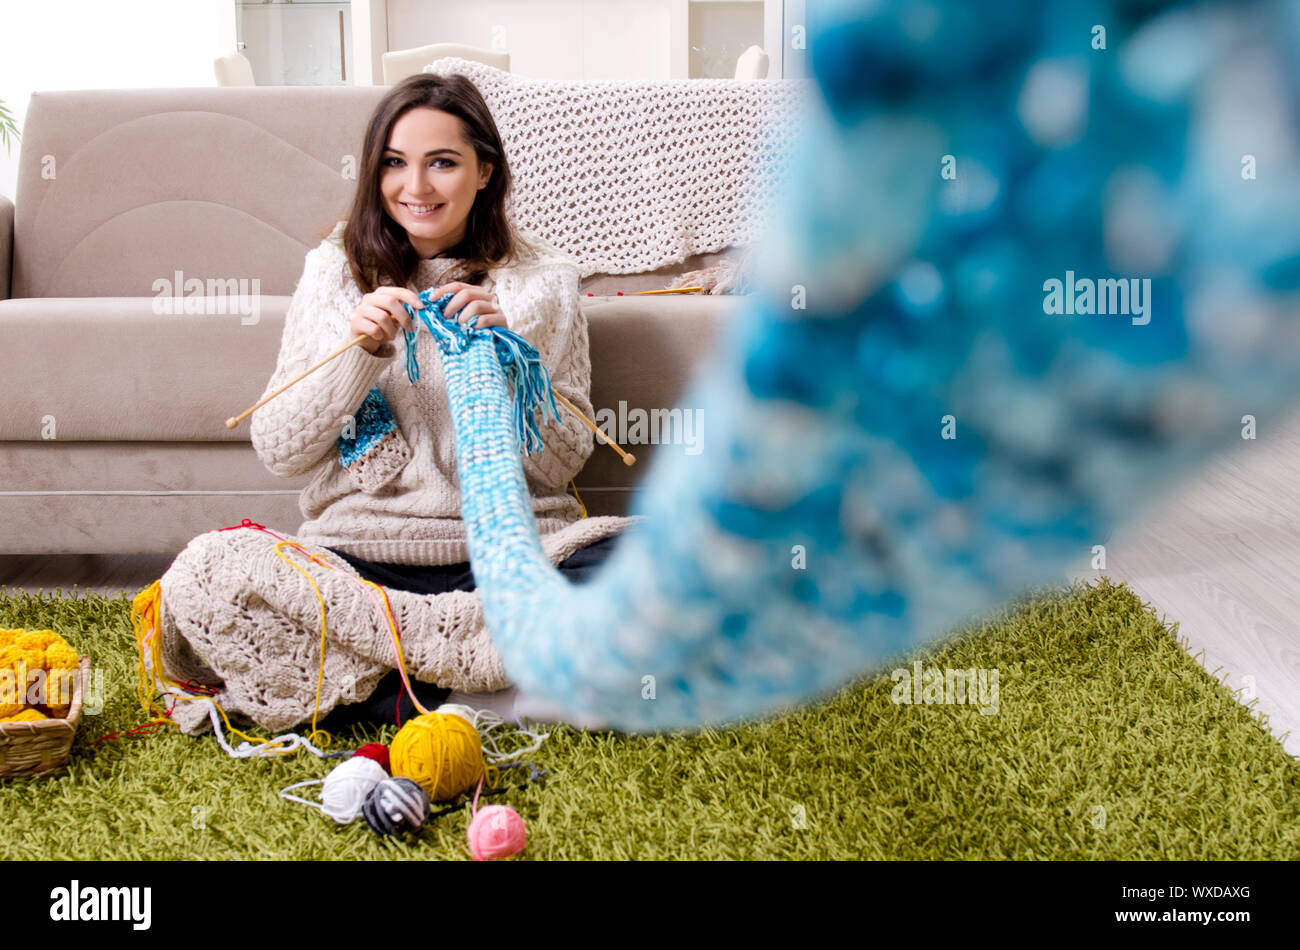 Young Beautiful woman knitting at home Banque D'Images